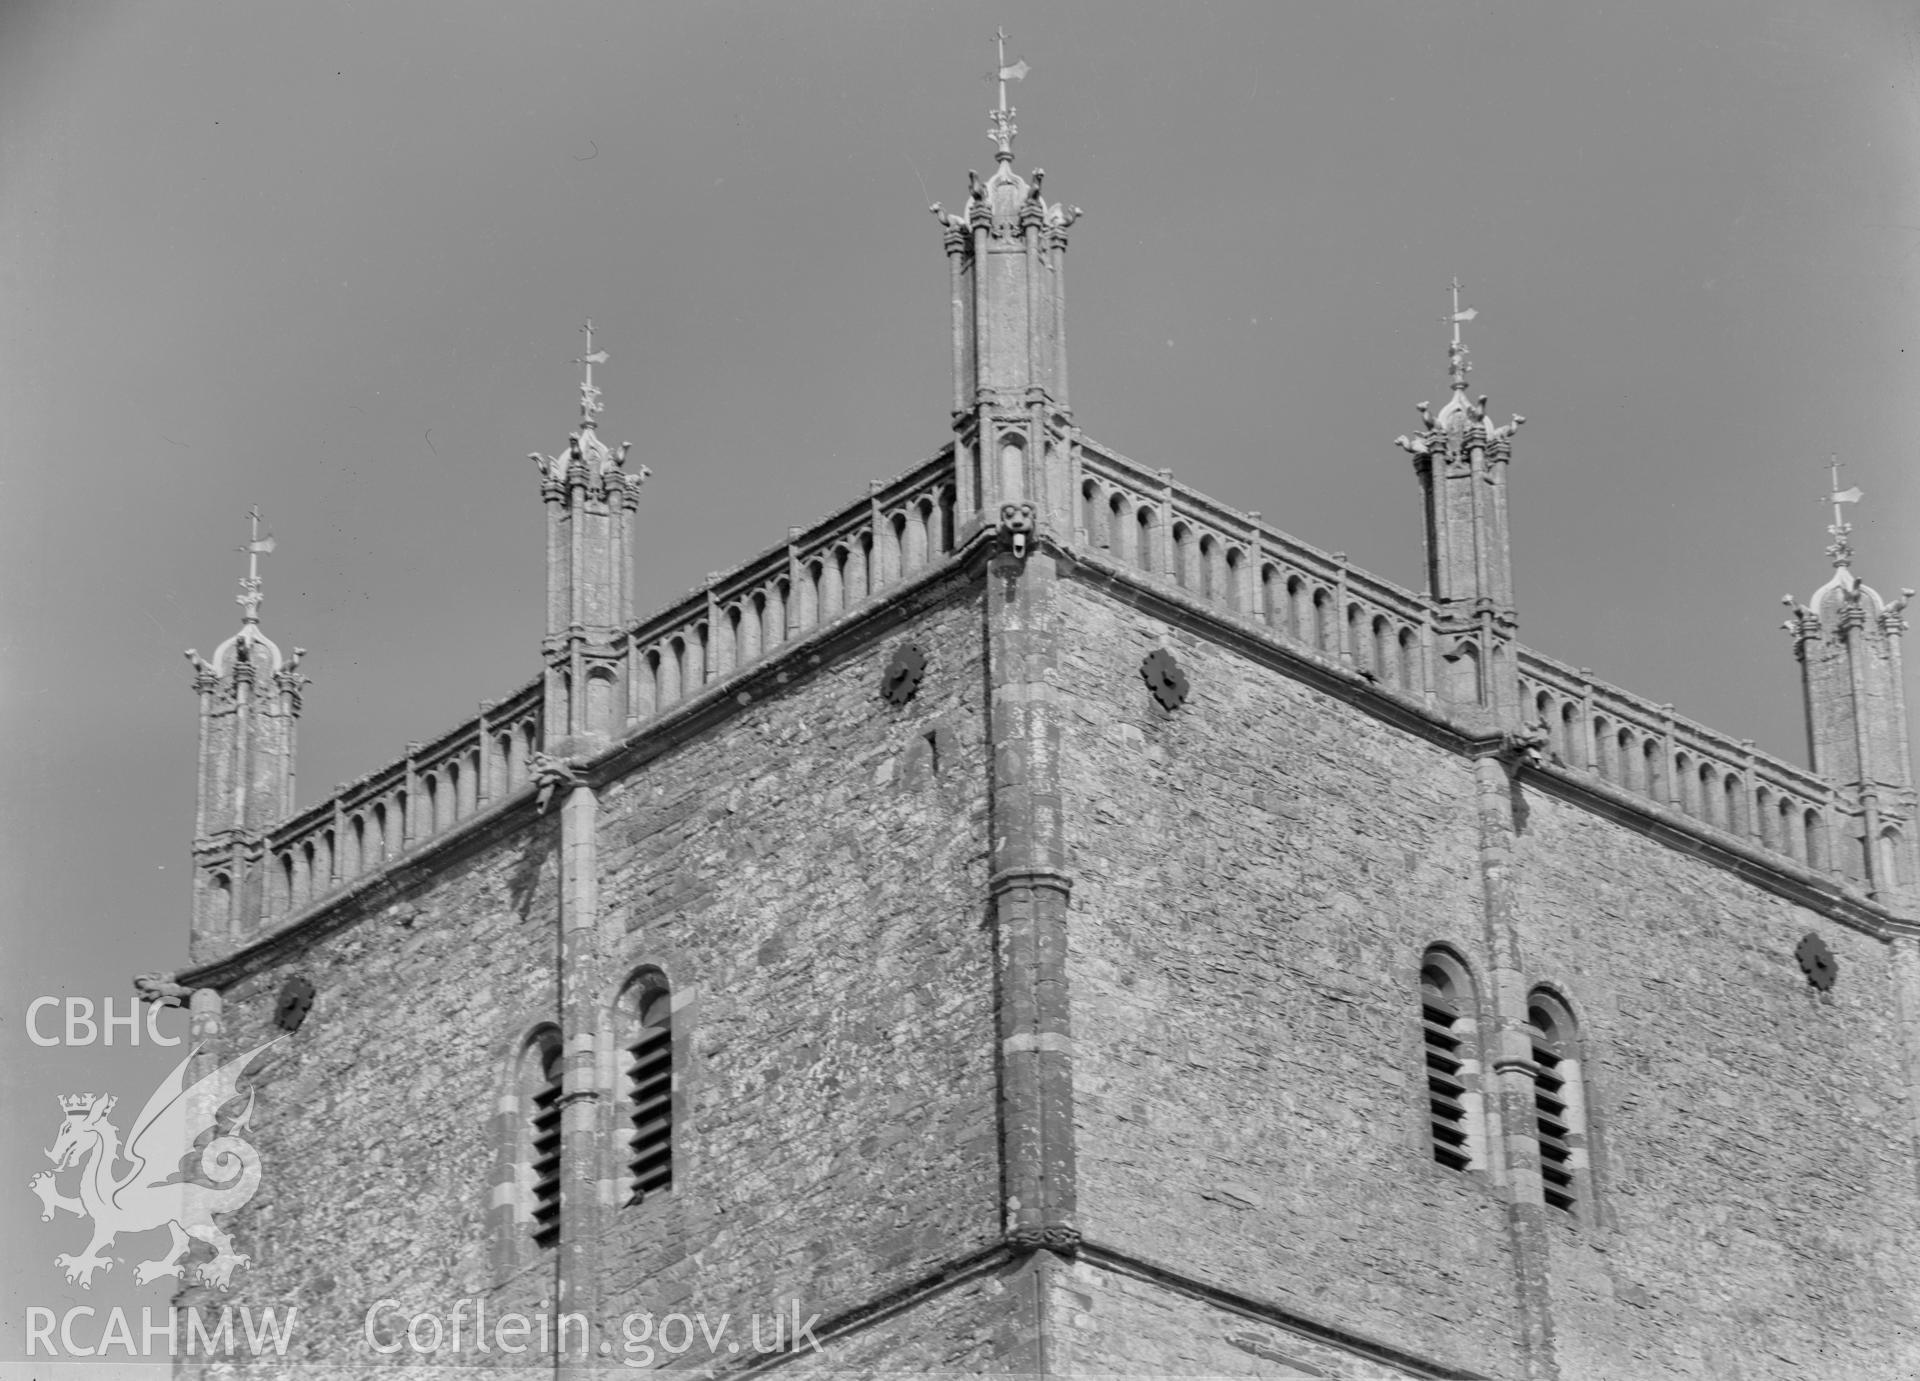 Digital copy of a black and white nitrate negative showing exterior detail of the tower at St. David's Cathedral, taken by E.W. Lovegrove, July 1936.